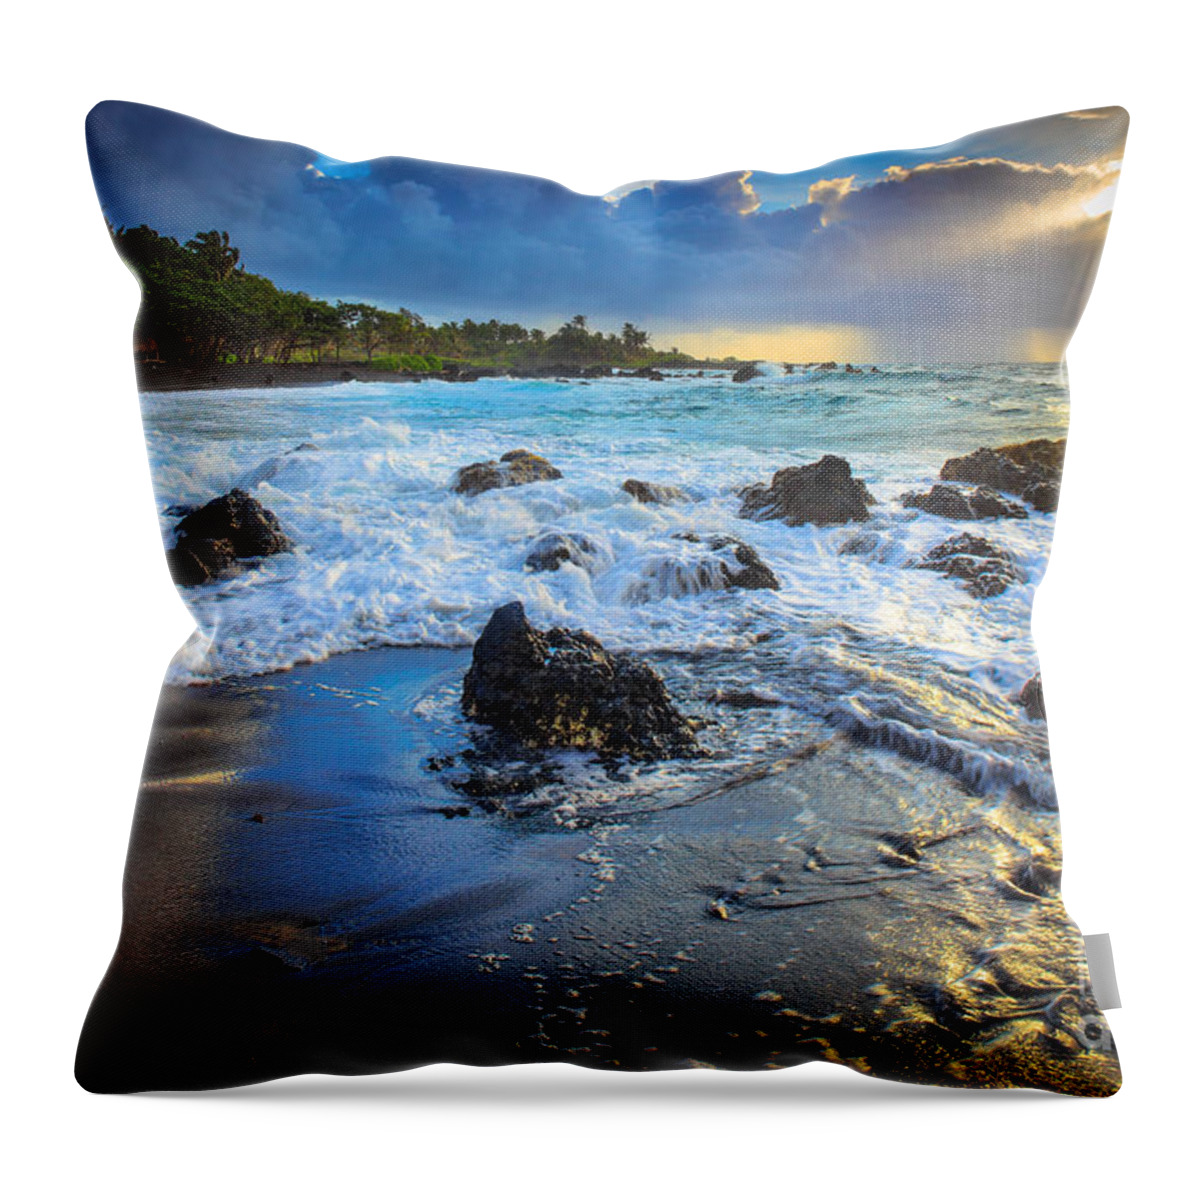 America Throw Pillow featuring the photograph Maui Dawn by Inge Johnsson